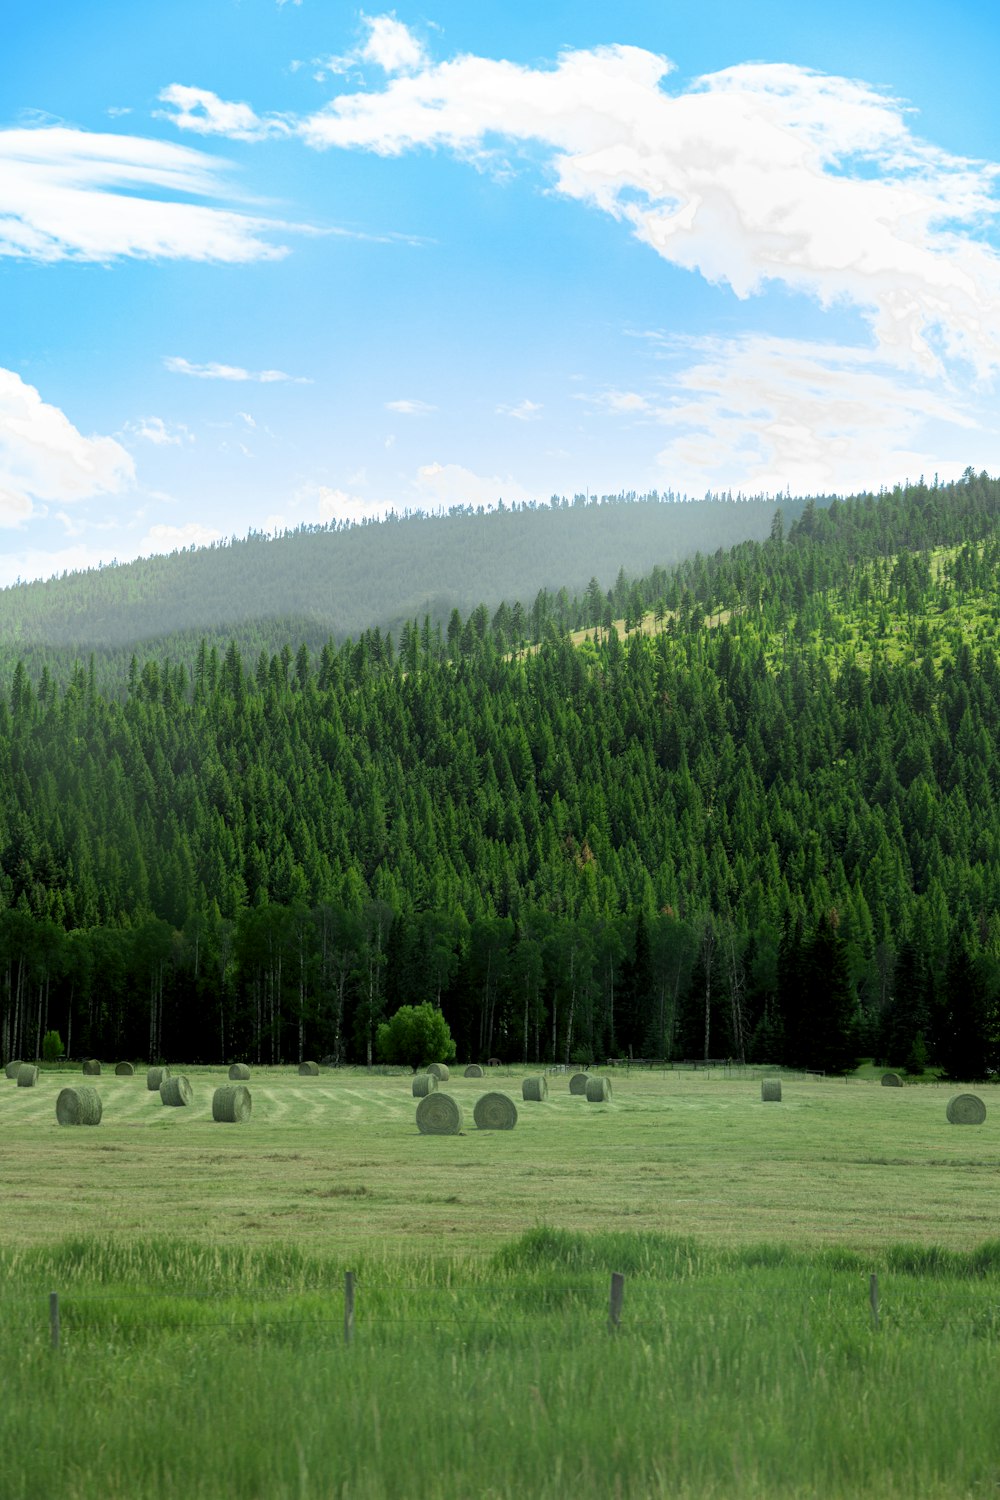 a grassy field with bales of hay in the foreground